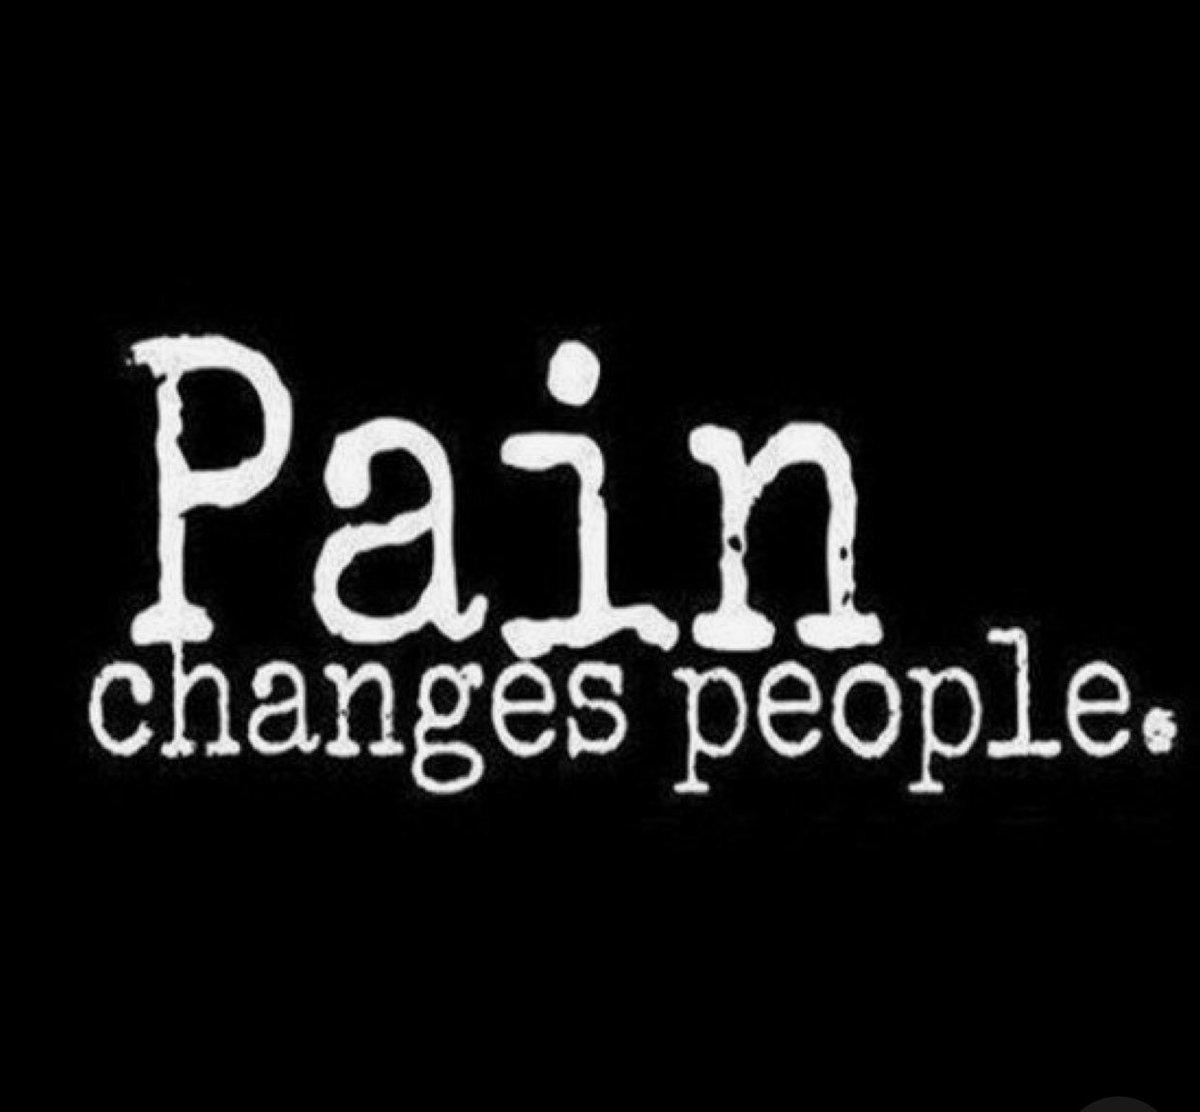 Don’t let #pain change you! 
For more info go to apainrelief.com or call/text 352-409-0806
##backpainrelief #neck #musclepainrelief #muscles #bowen